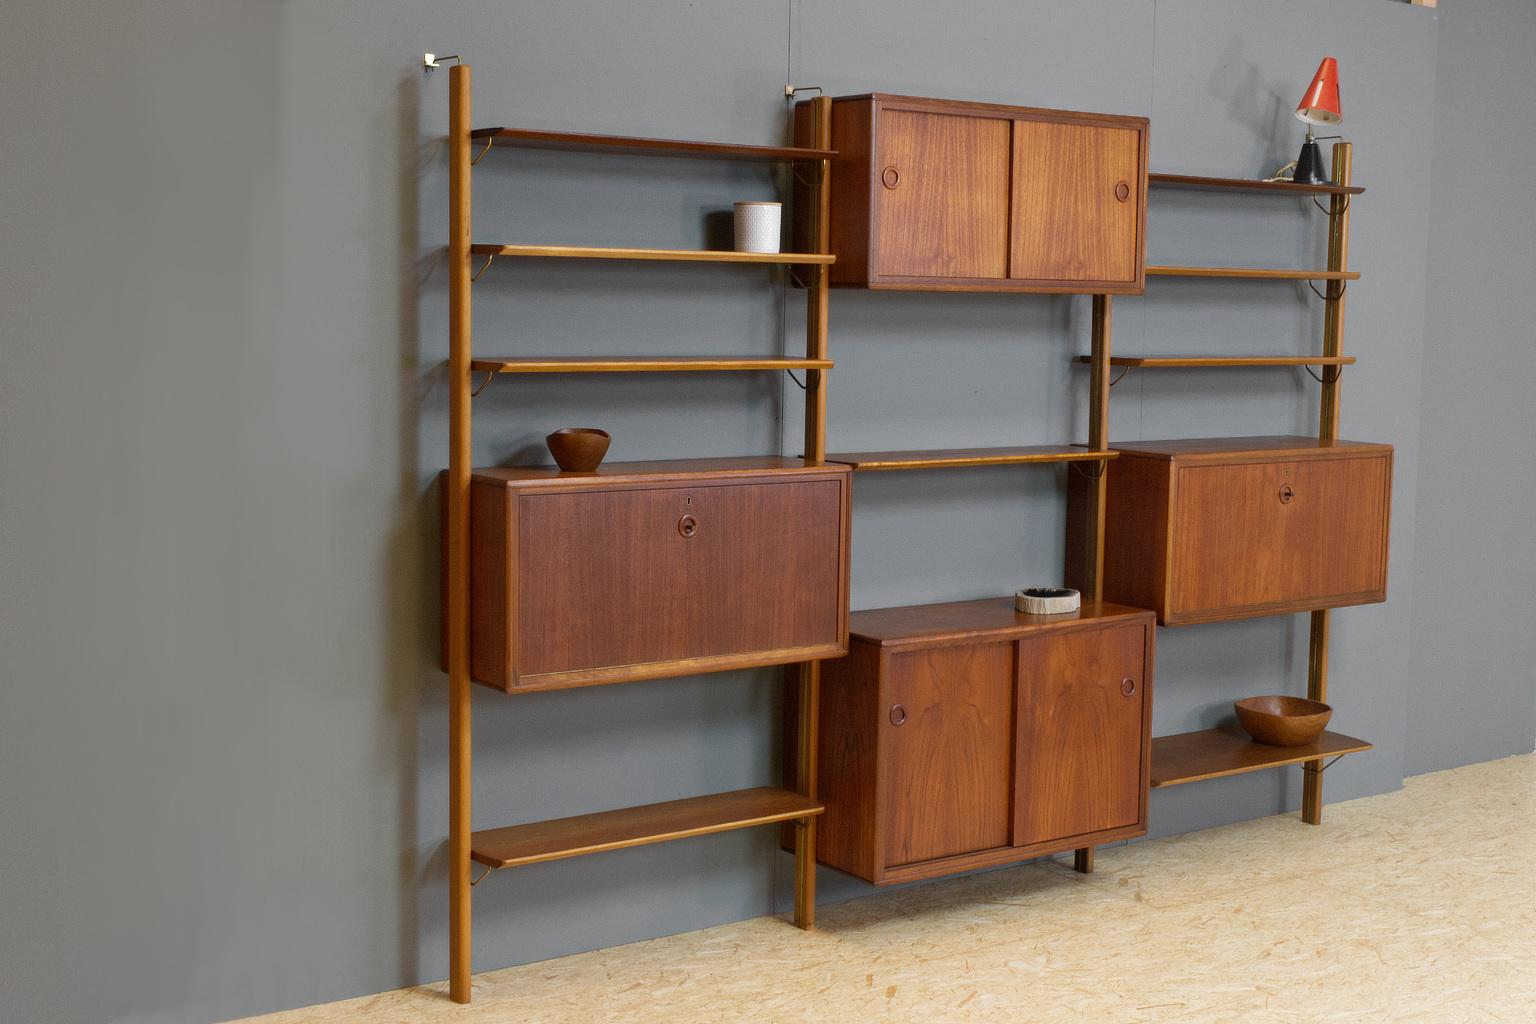 Vintage midcentury modular wall unit in teak designed by William Watting for Dutch manufacturer Fristho, 1960s. The solid craftsmanship of Fristho shows in this open and transparent storage system. The item is in excellent condition! The large